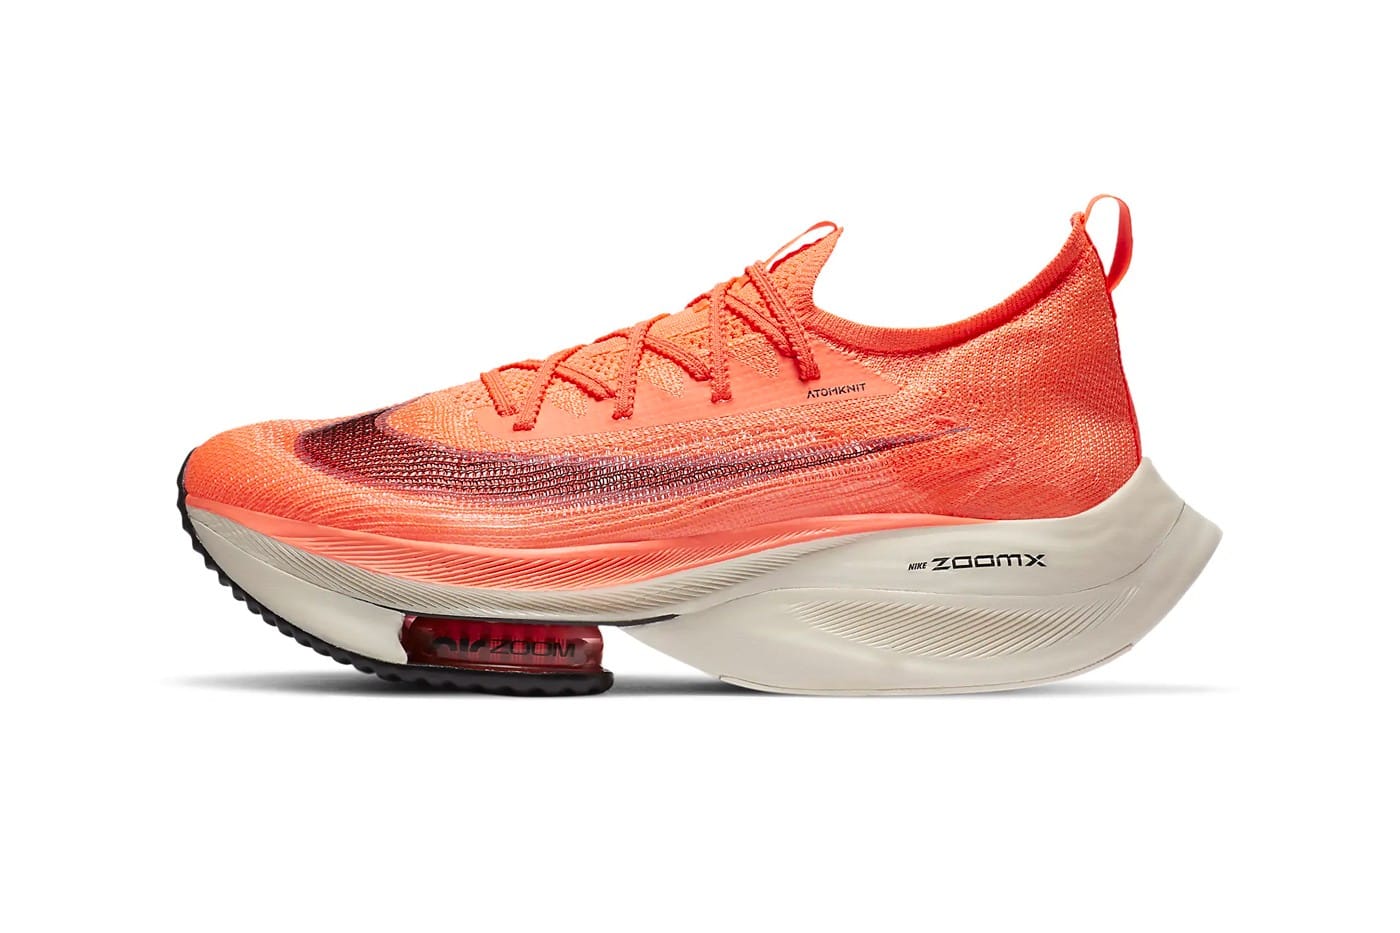 Nike ZoomX Vaporfly Next%、Air Zoom 